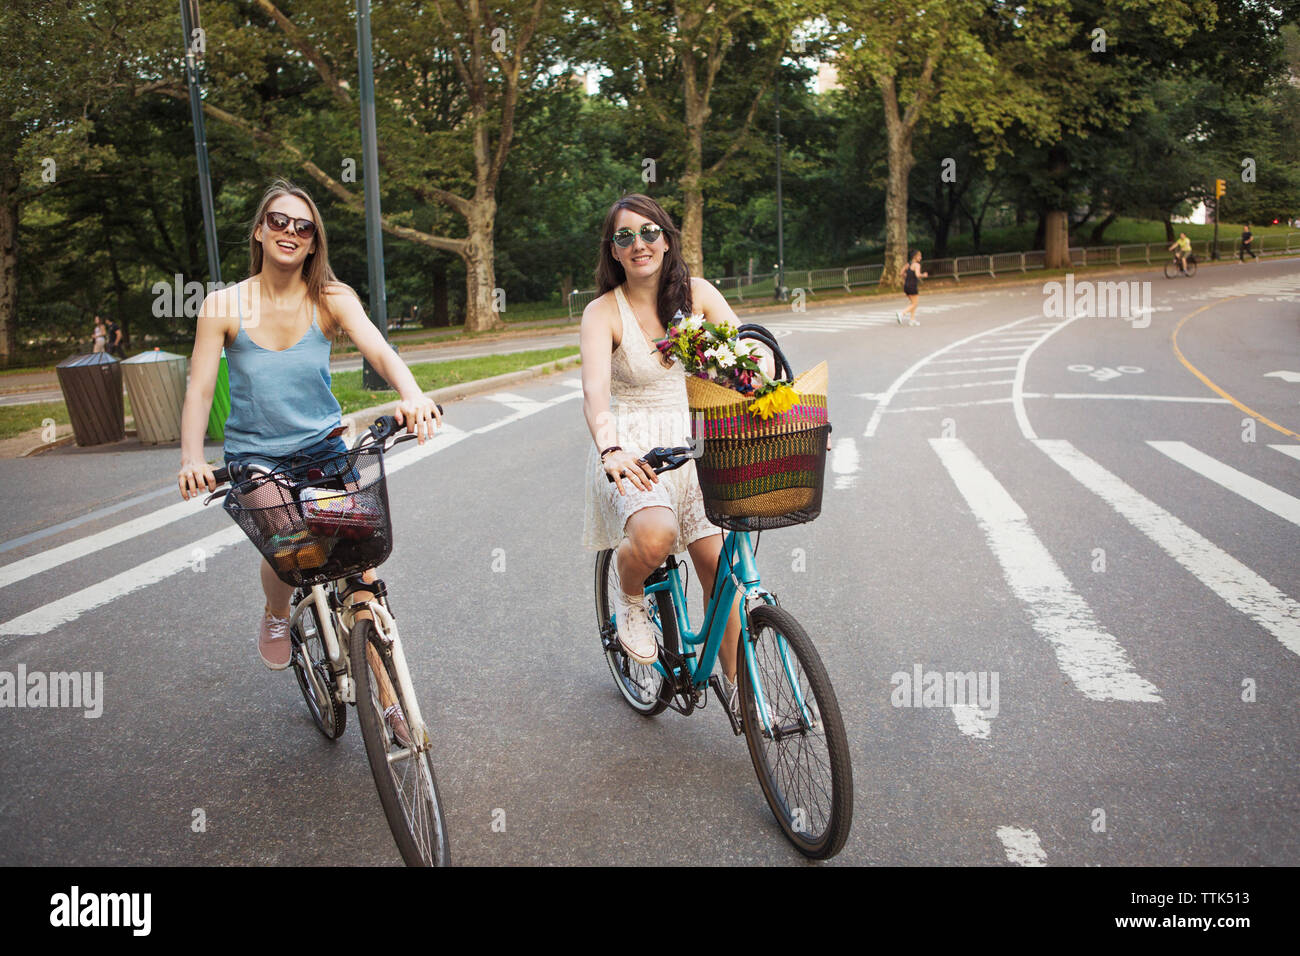 Smiling women cycling on city street against trees Stock Photo